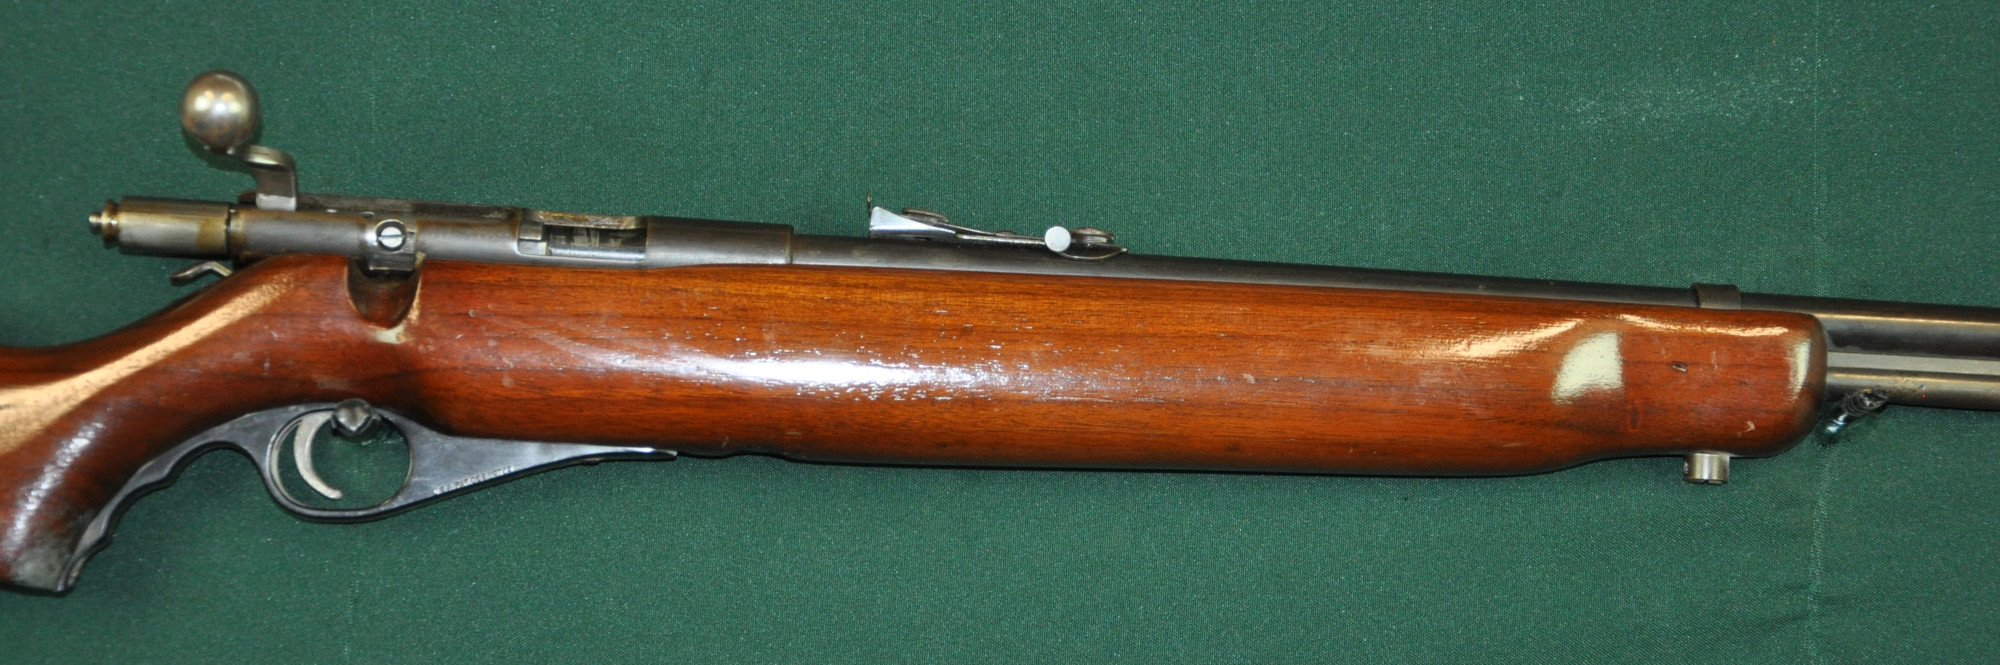 Wards Western Field Model 491a .22 Bolt Action Rifle For Sale at ...